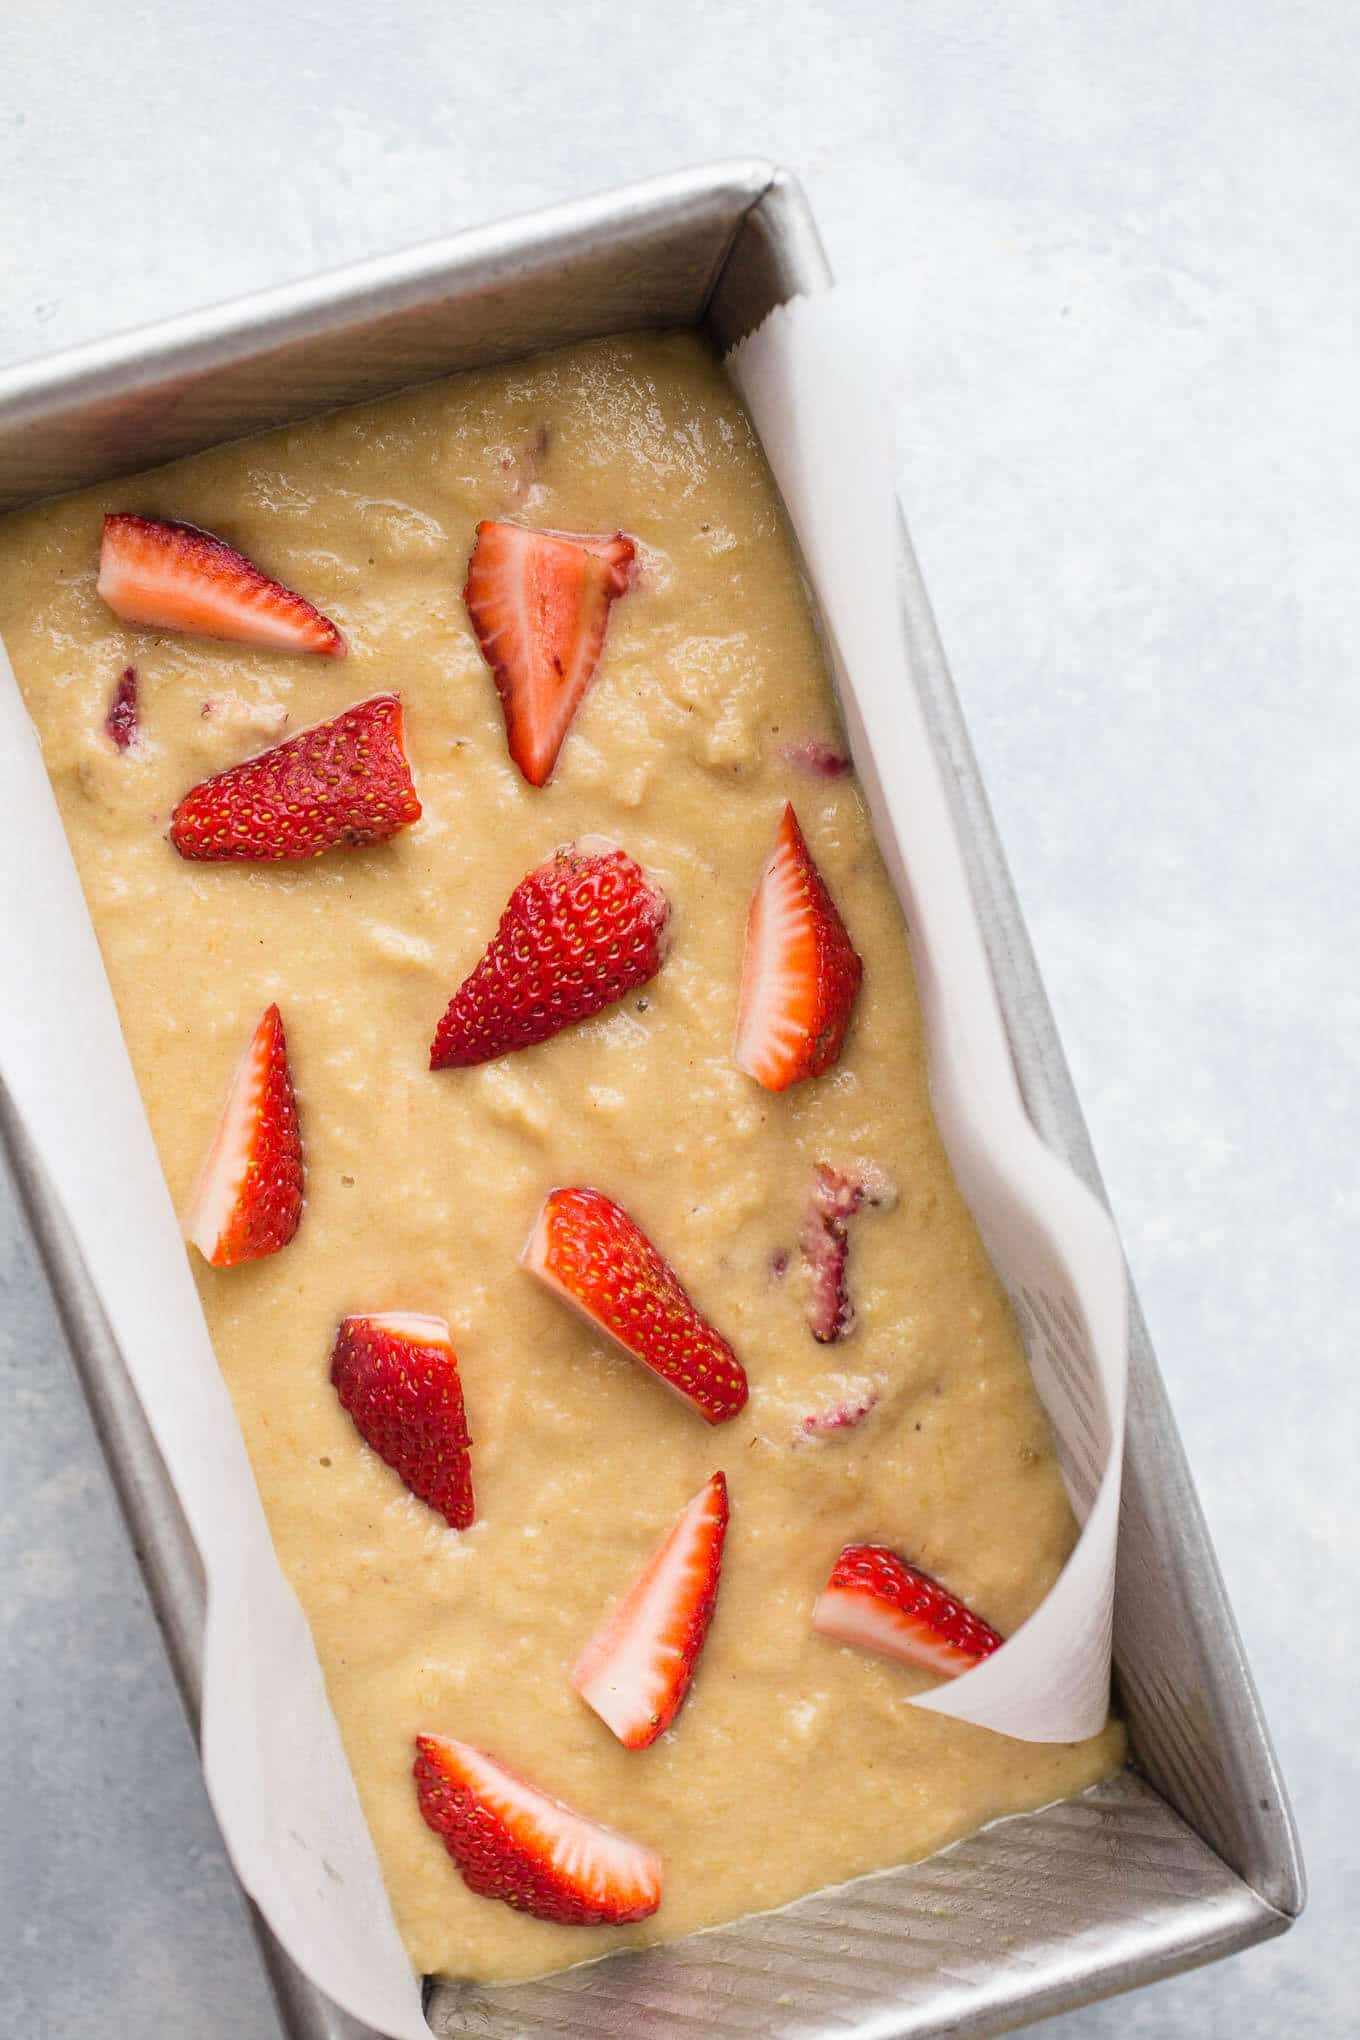 Roasted Strawberry Banana Bread made with almond flour, gluten-free oat flour, coconut sugar, ripe bananas, and topped with extra strawberries. A healthy banana bread recipe that is gluten-free, dairy-free, and refined sugar-free! 